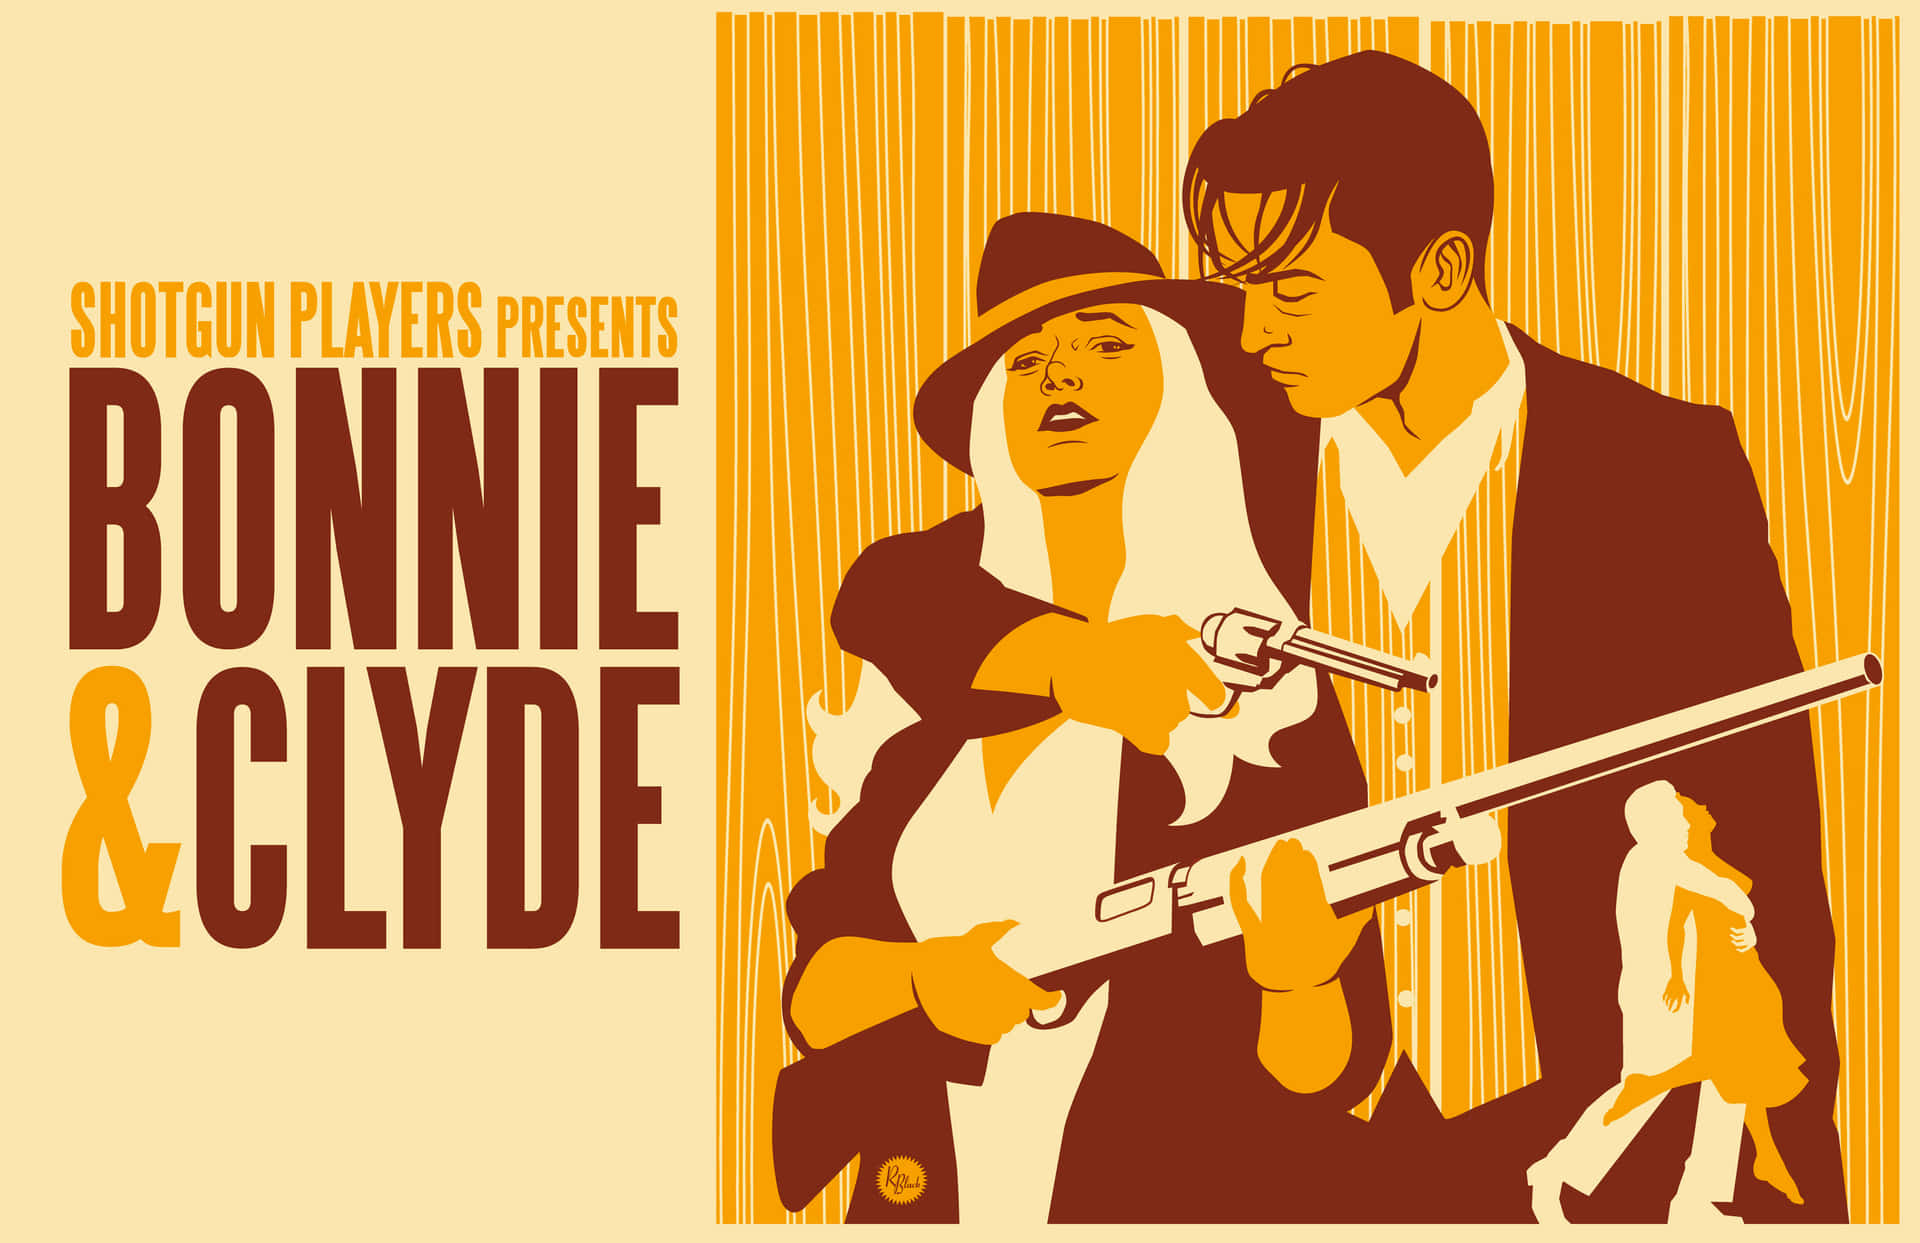 Bonnie and Clyde, the infamous Depression-era couple